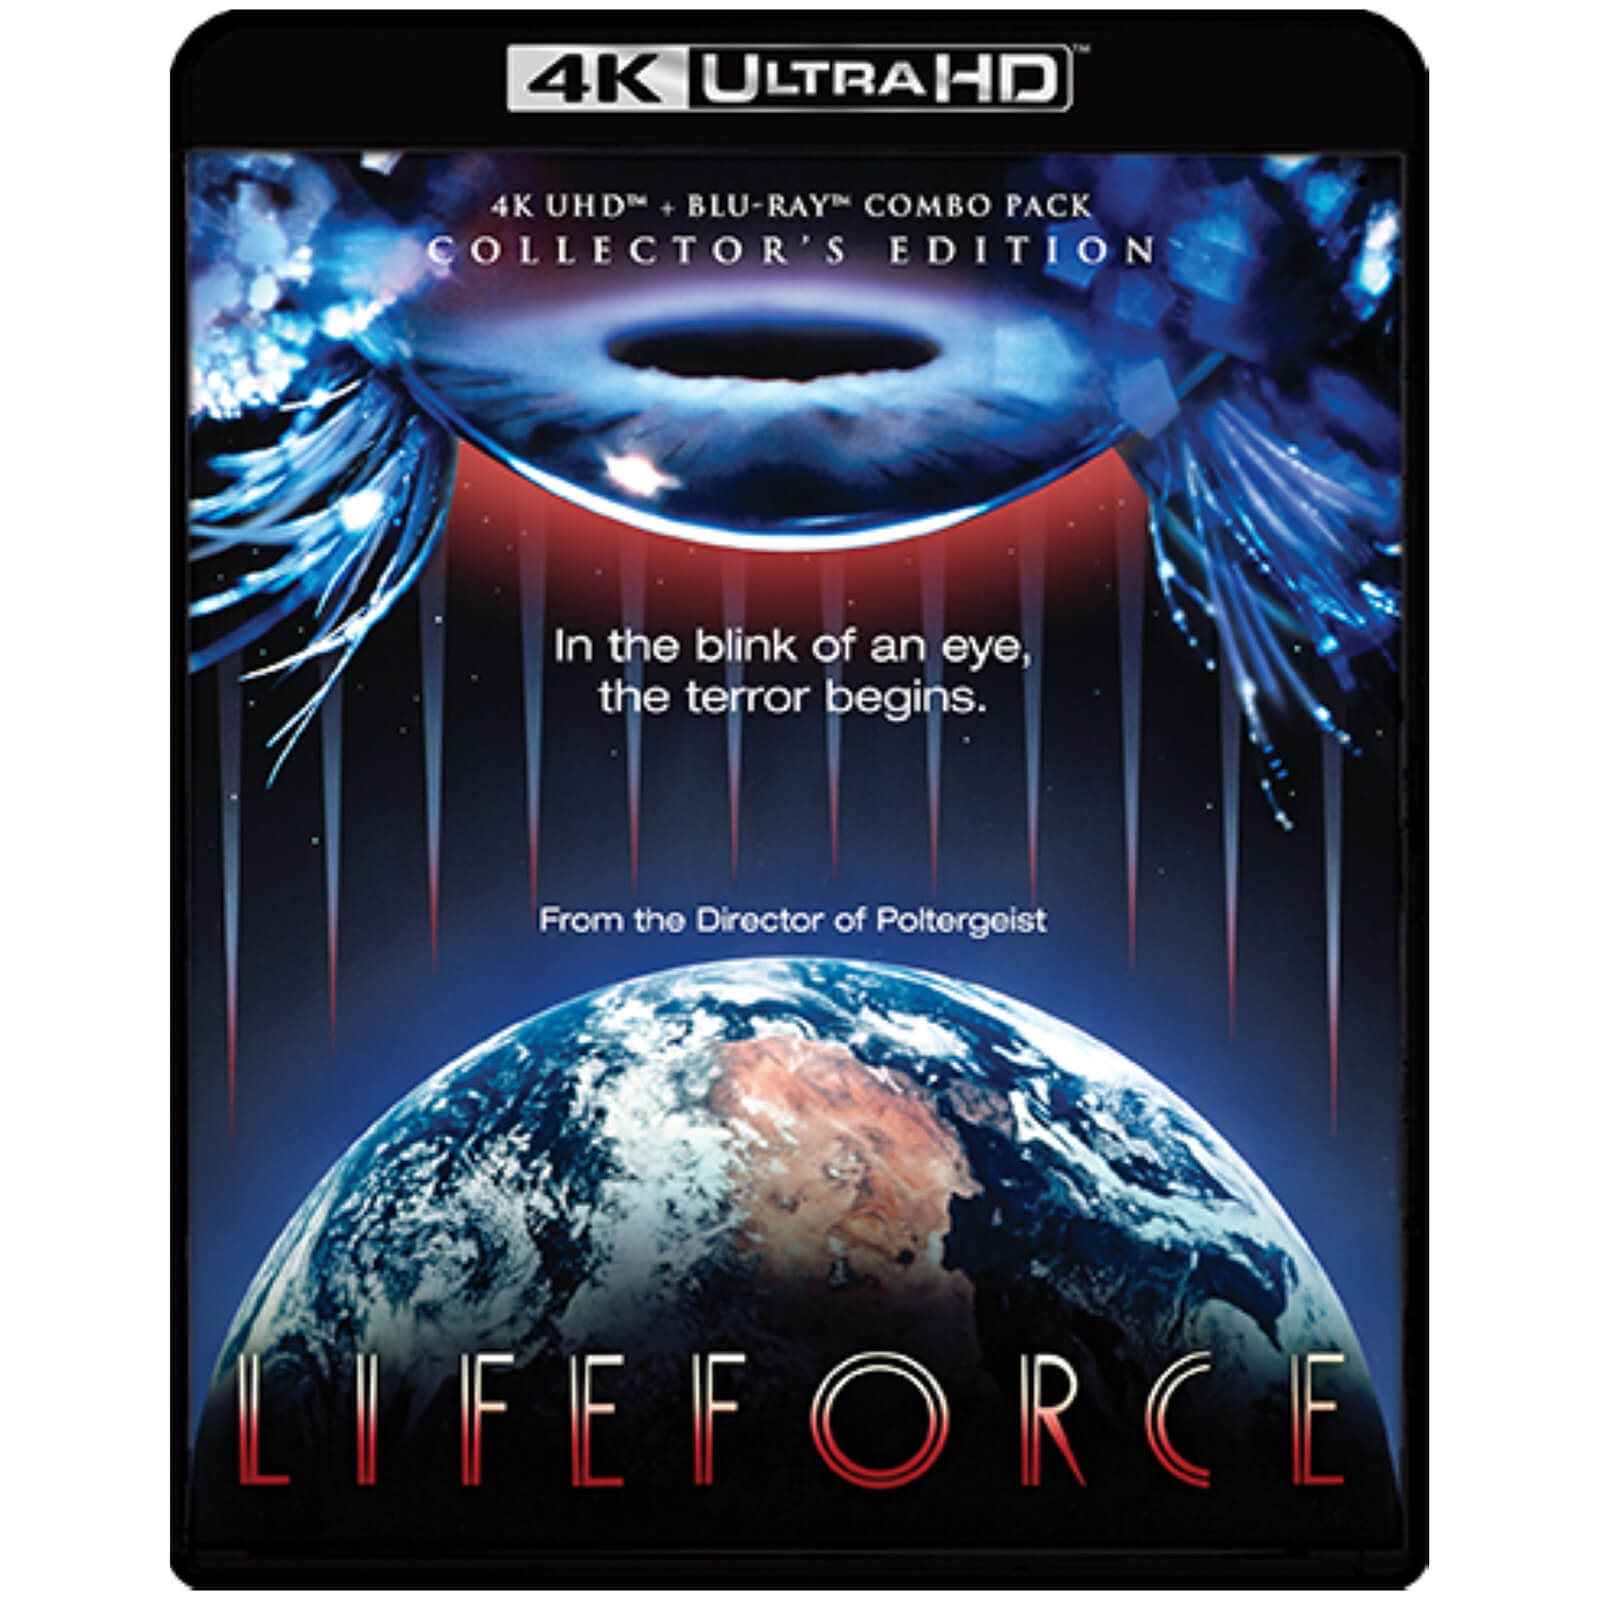 Lifeforce: Collector's Edition - 4K Ultra HD (Includes Blu-ray) (US Import)